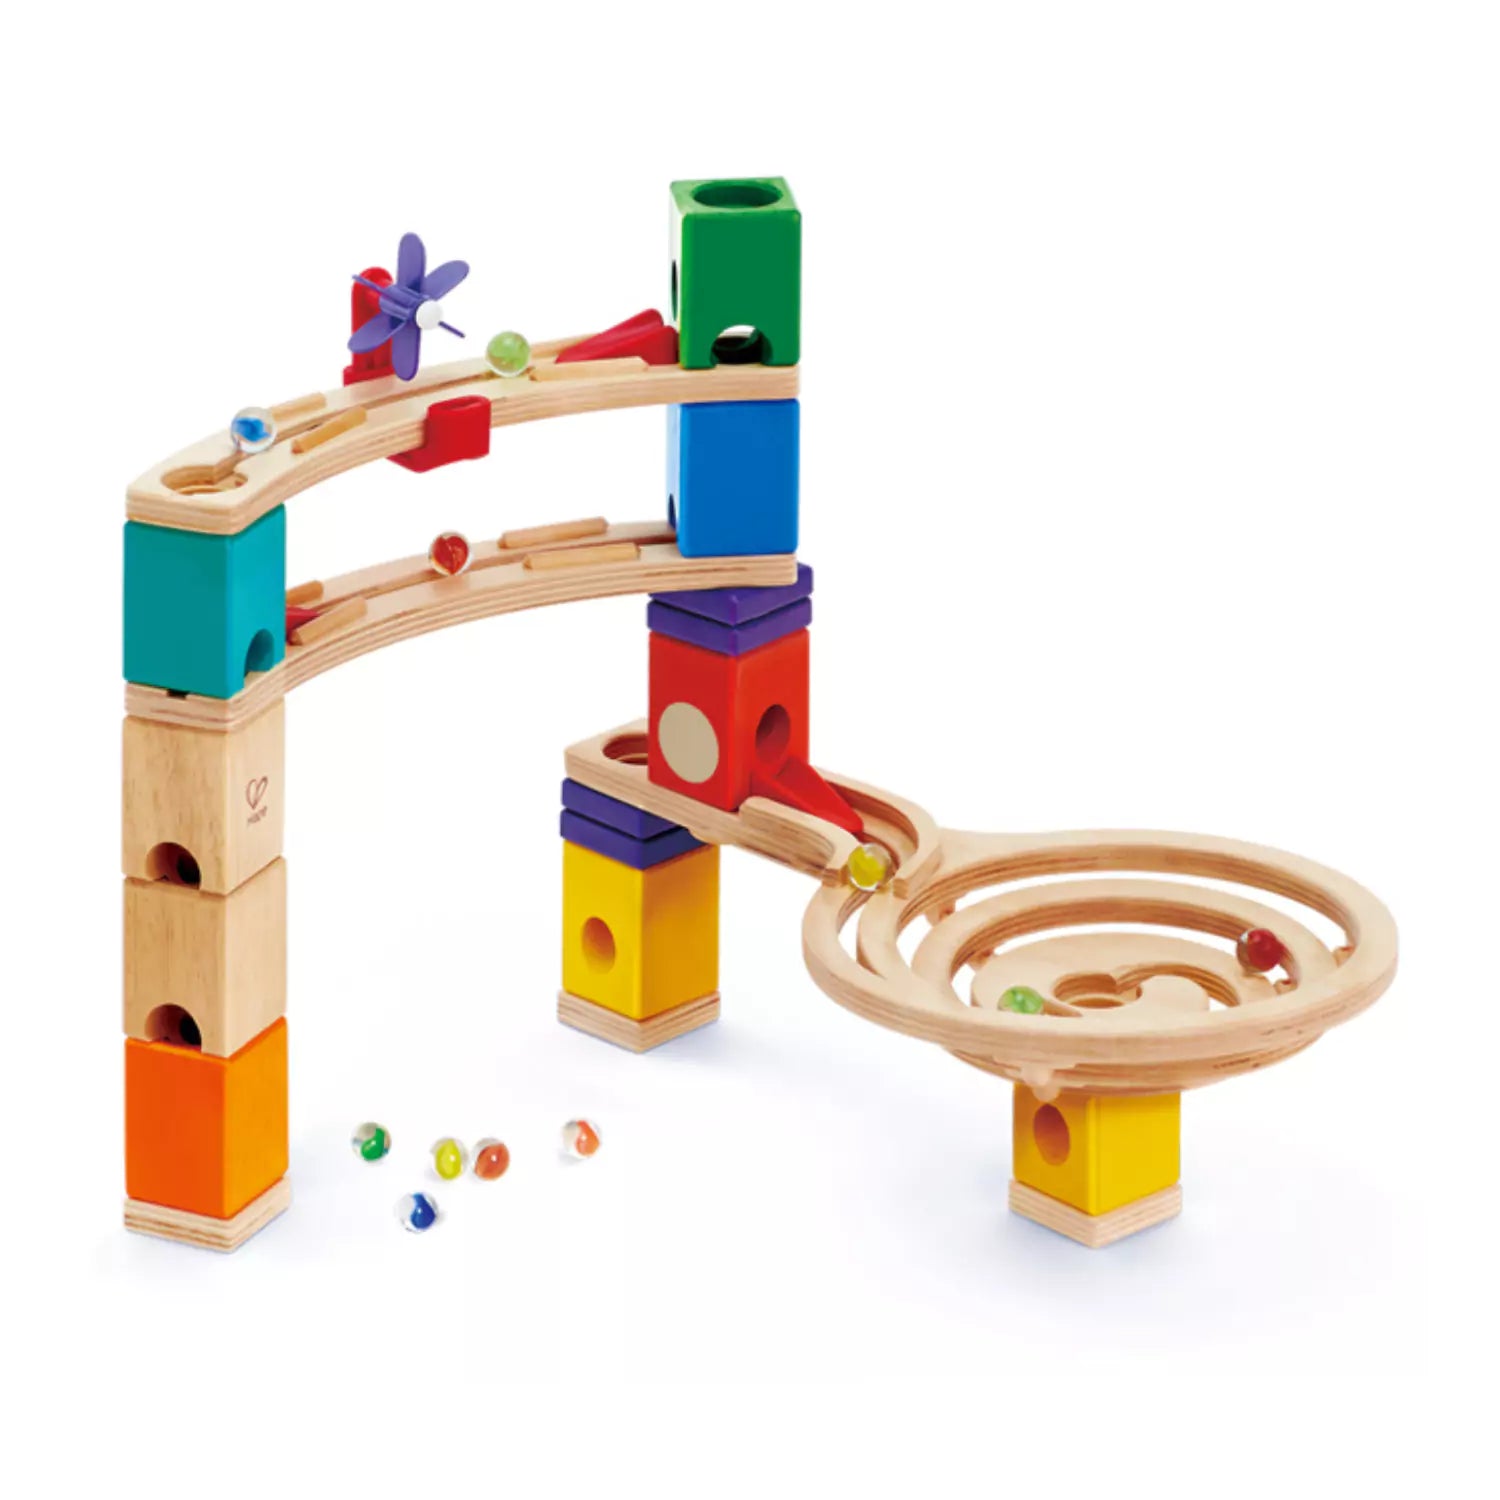 An image of Wooden Marble Run Set: Kids' STEM Toy for Endless Fun!